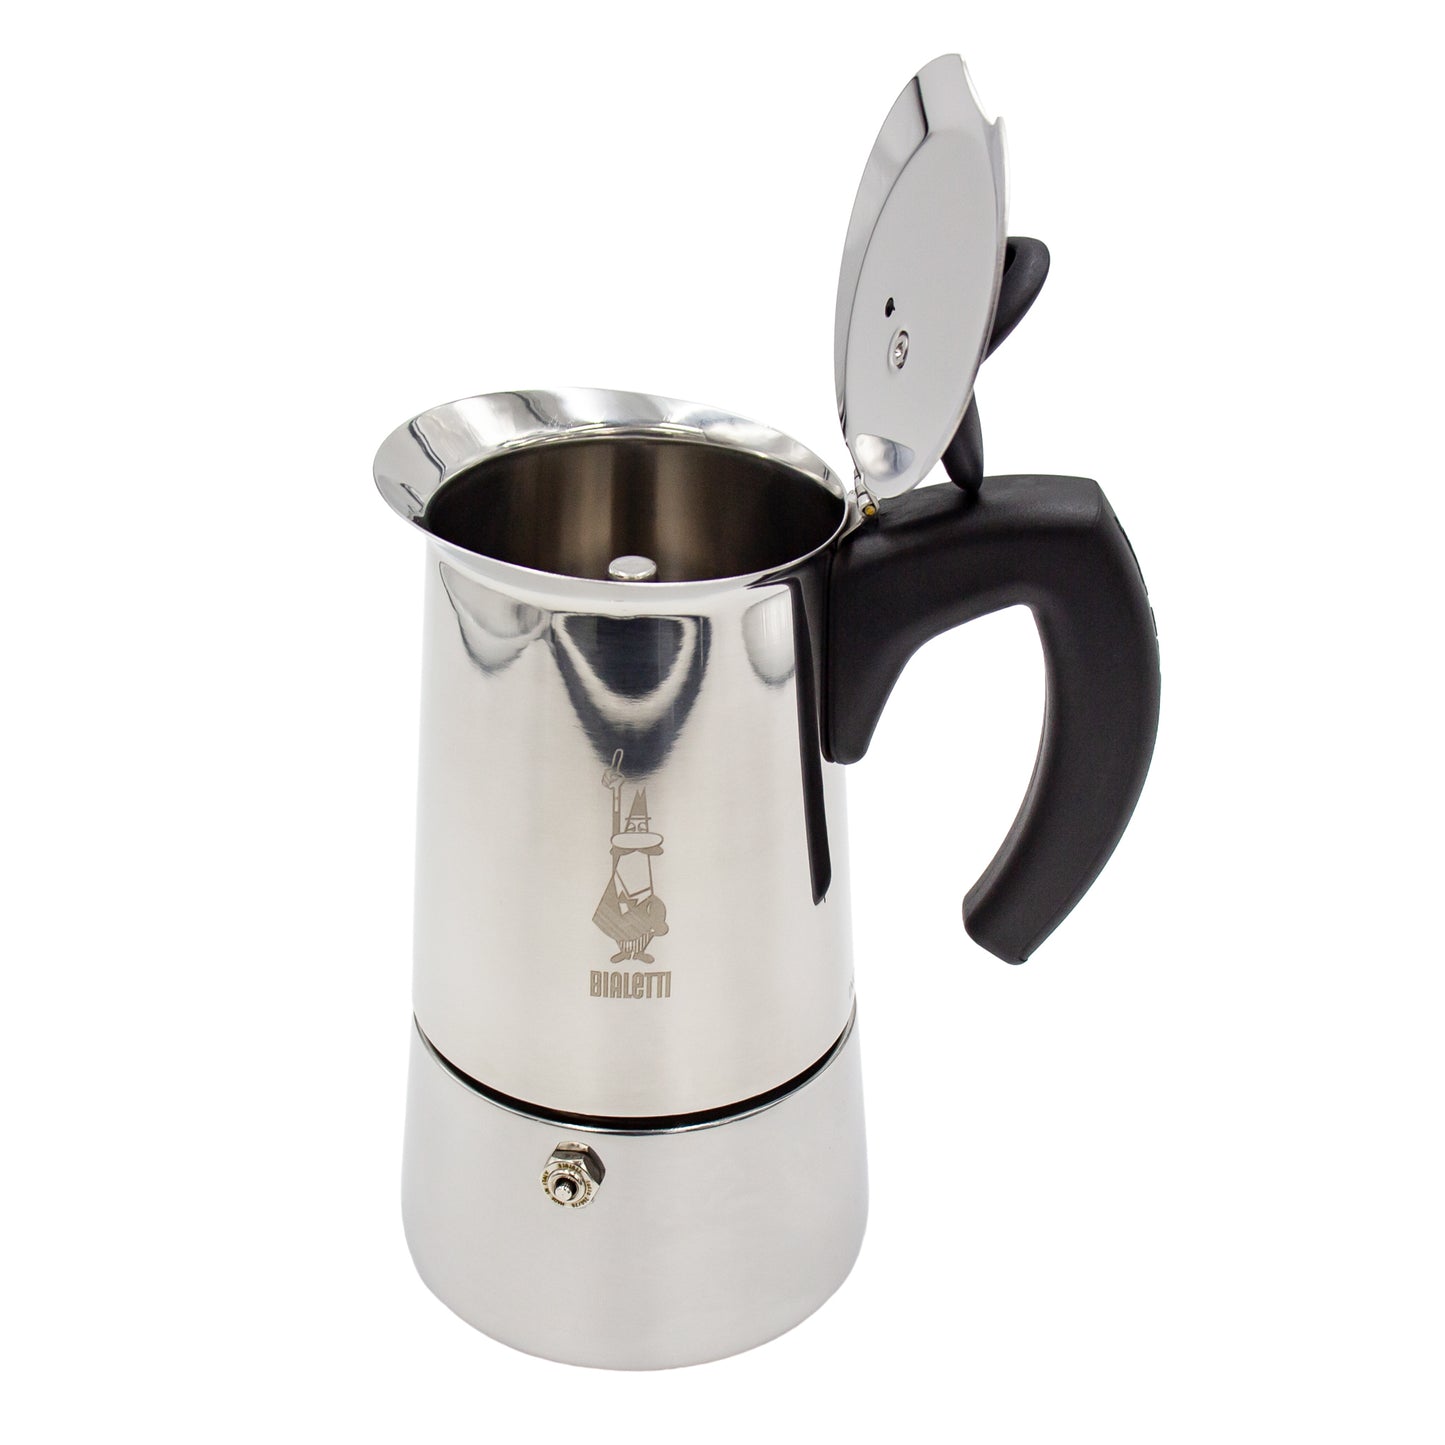 Italian made stainless steel bialetti musa 6 cup espresso coffee maker lid open